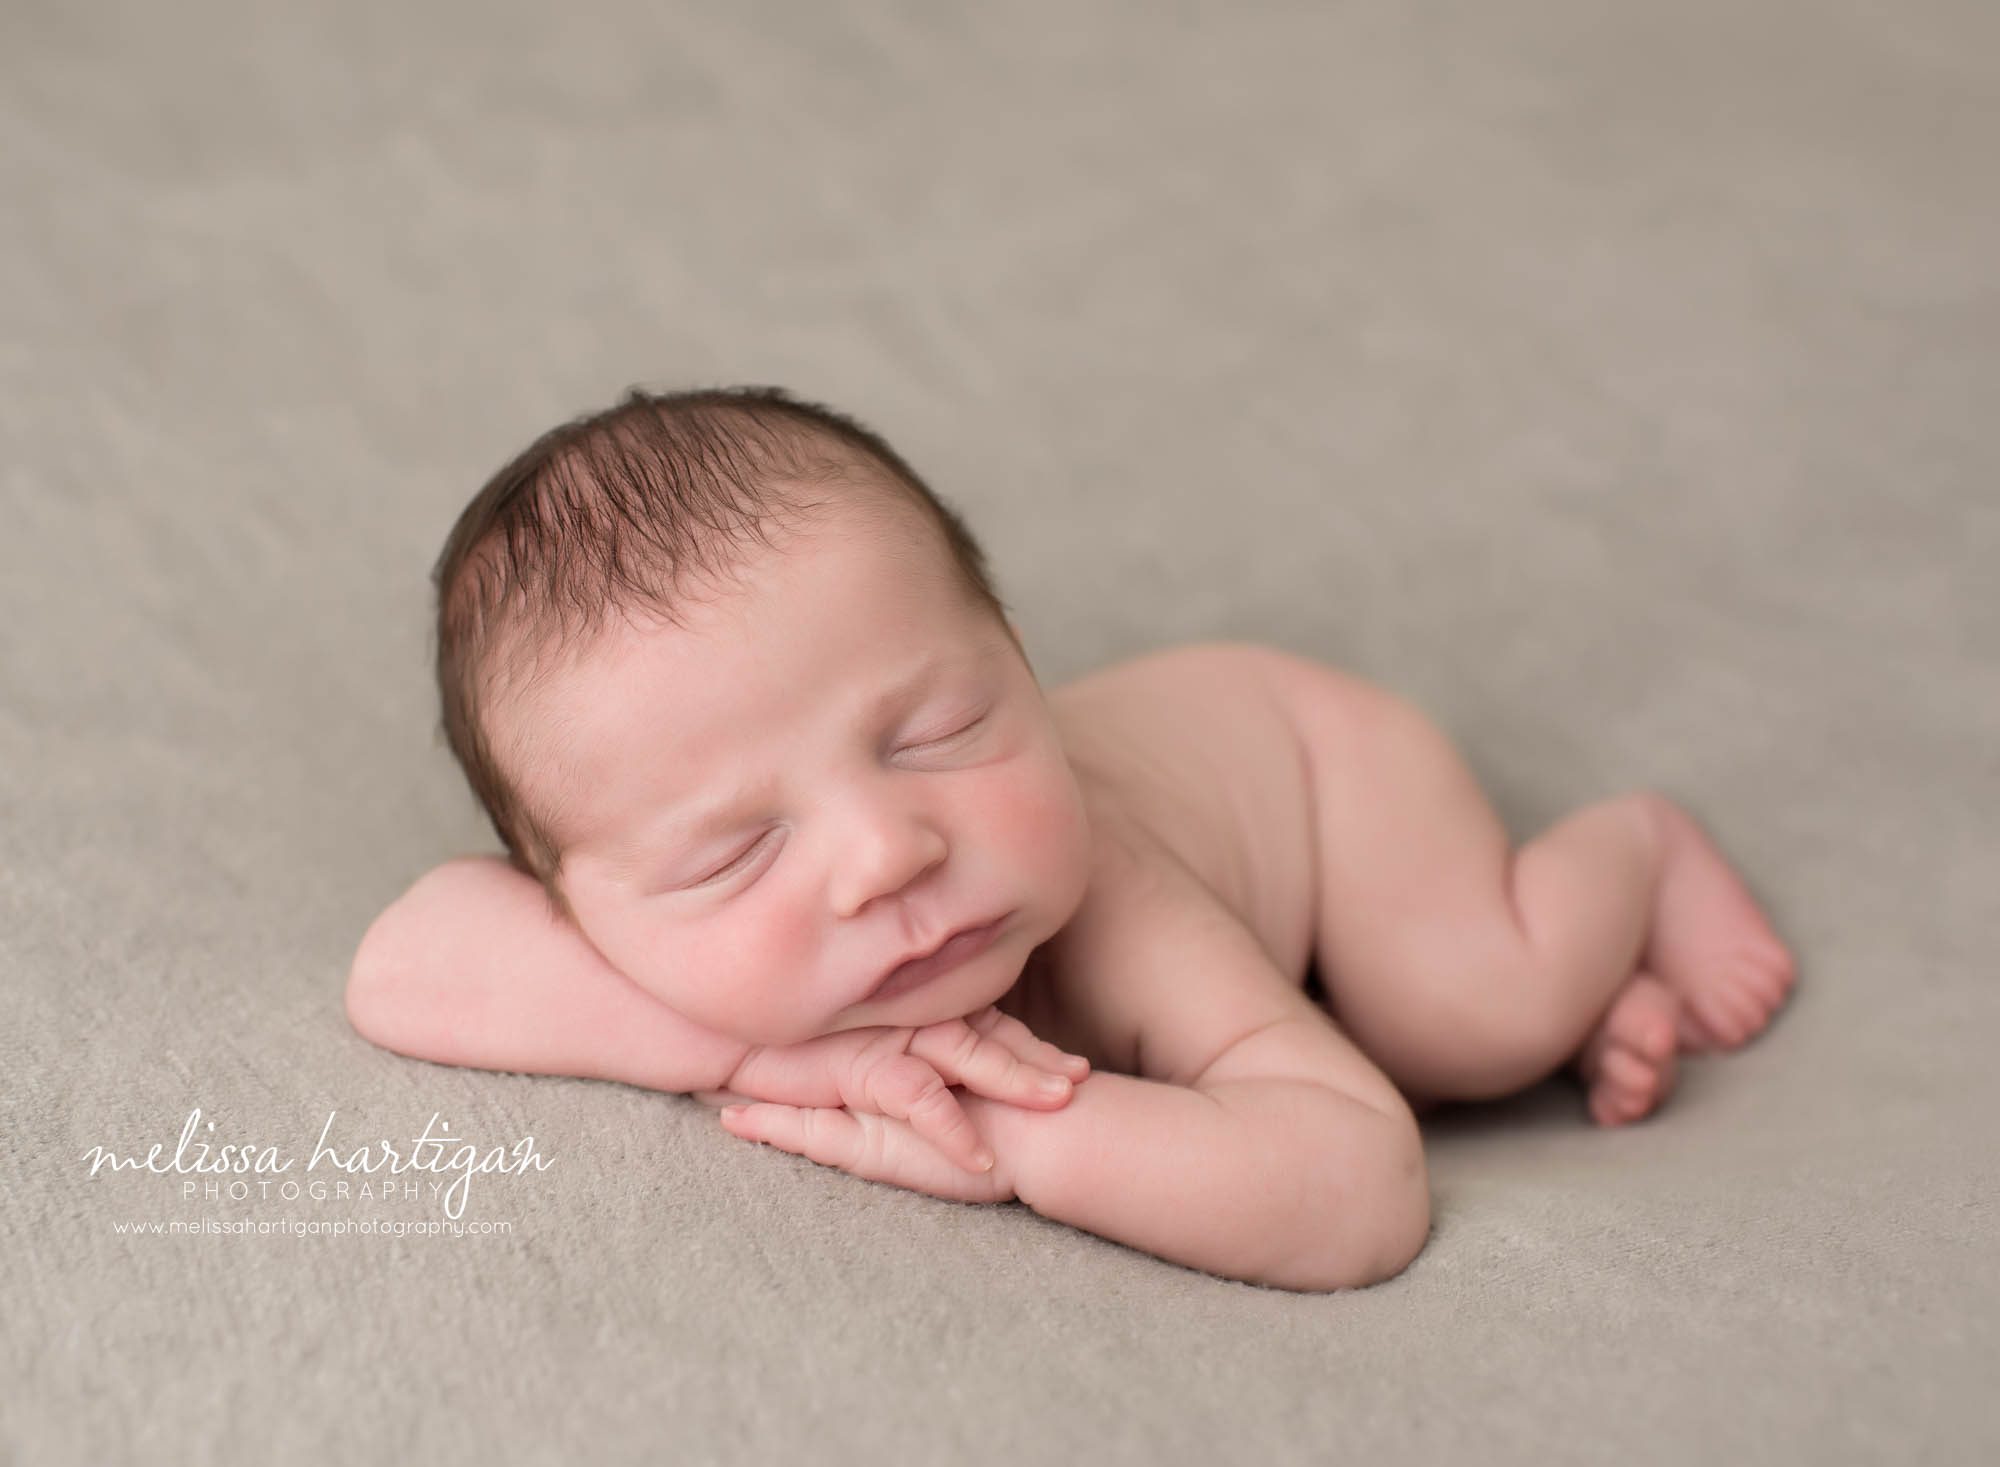 newborn baby boy posed on tummy with head rested on hands